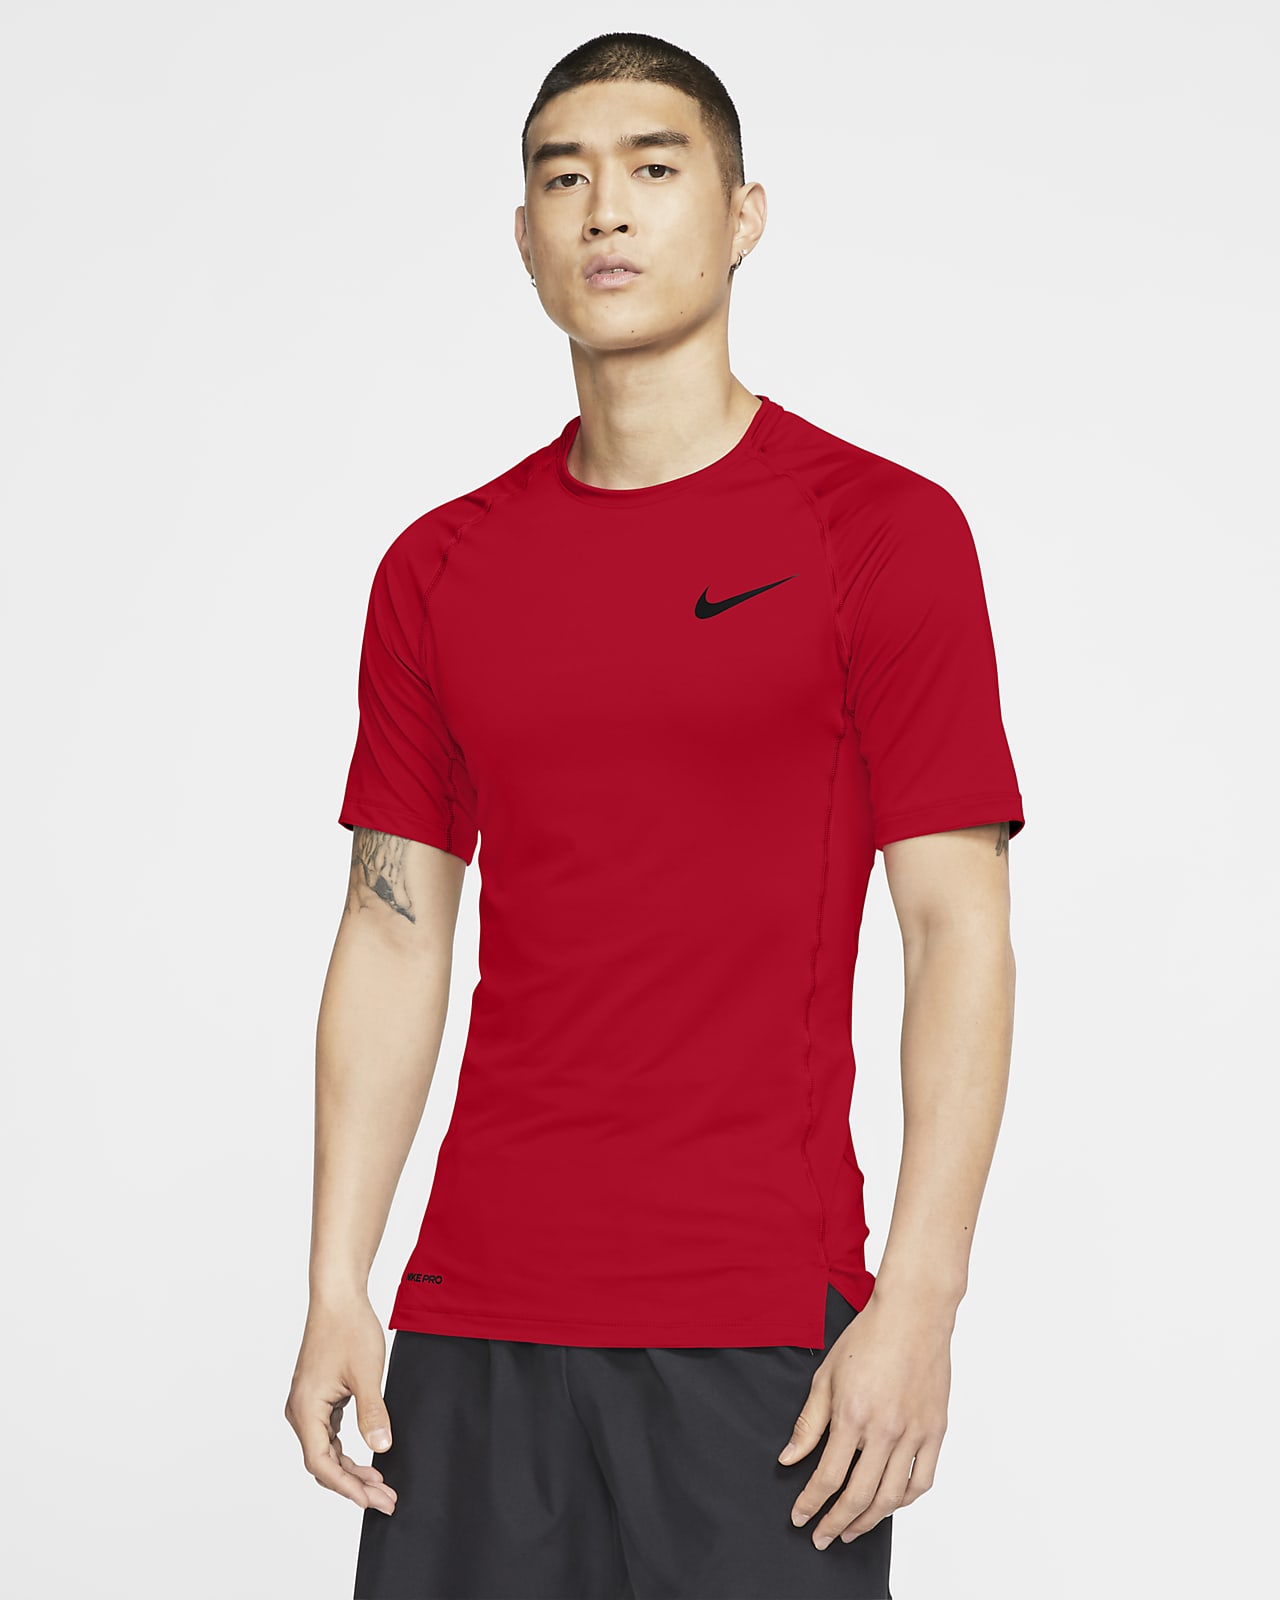 nike pro fitted top